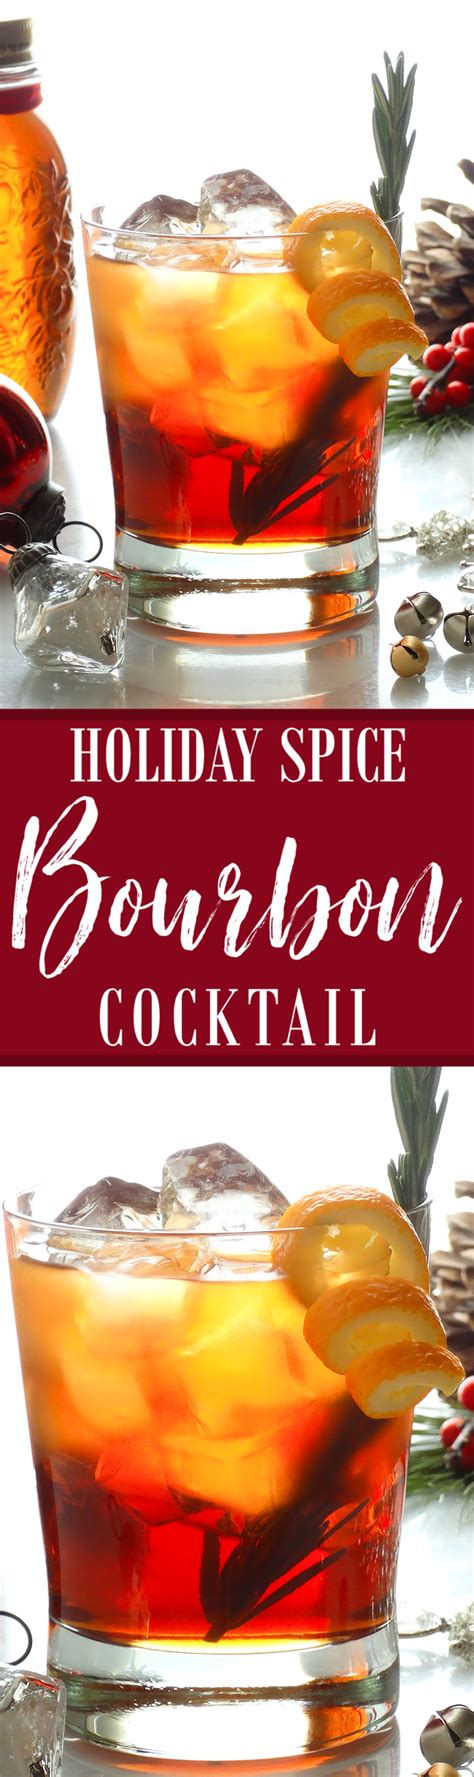 A cocktail should be served so cold it hurts, which you should repeat to yourself as you stir. Bourbon Christmas Cocktails - Naughty but Nice Christmas ...